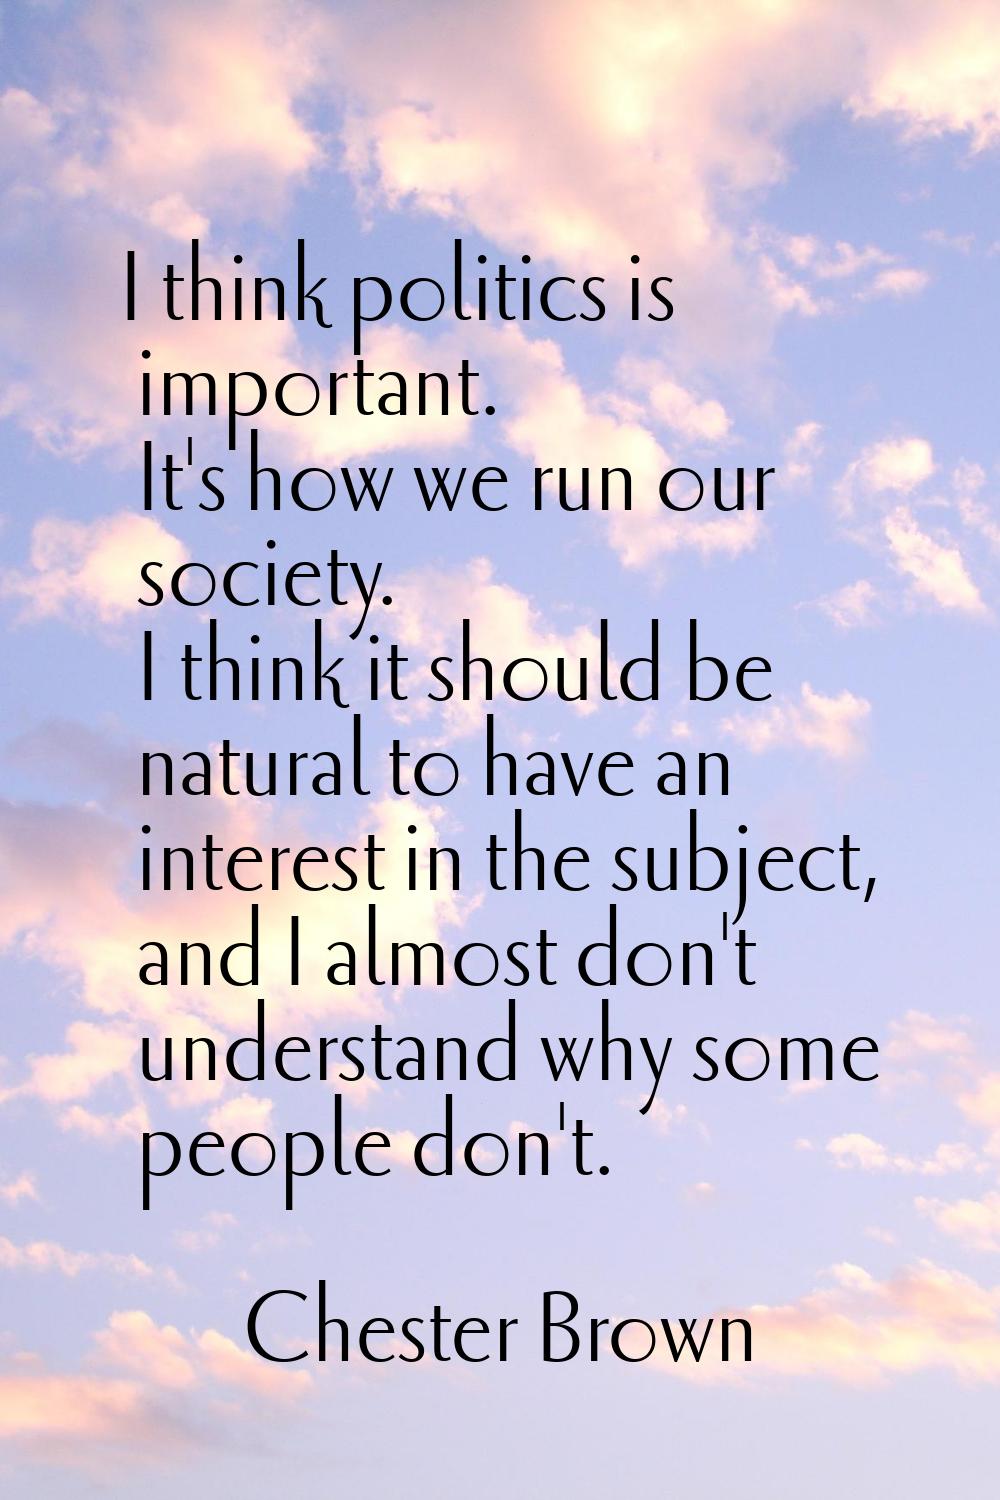 I think politics is important. It's how we run our society. I think it should be natural to have an